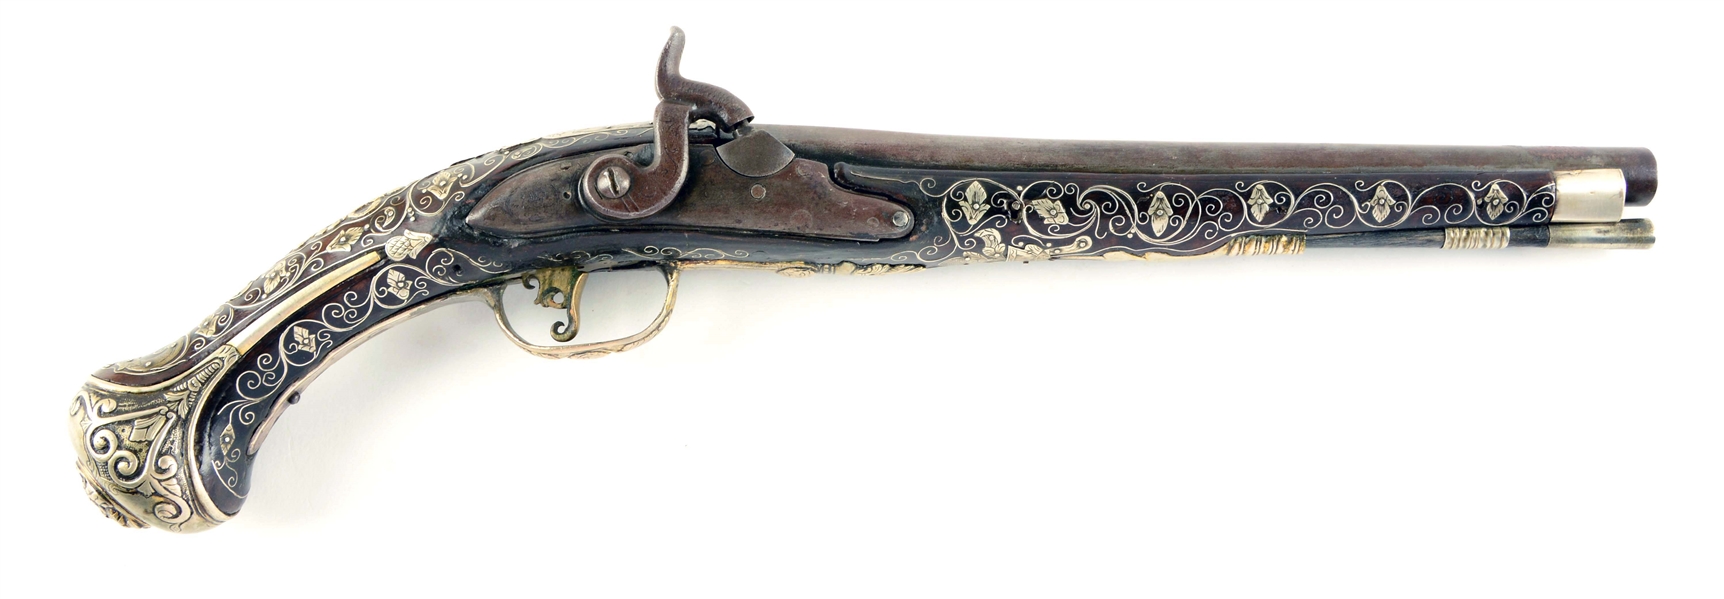 (A) ORNATE OTTOMAN SILVER MOUNTED PERCUSSION HOLSTER PISTOL.